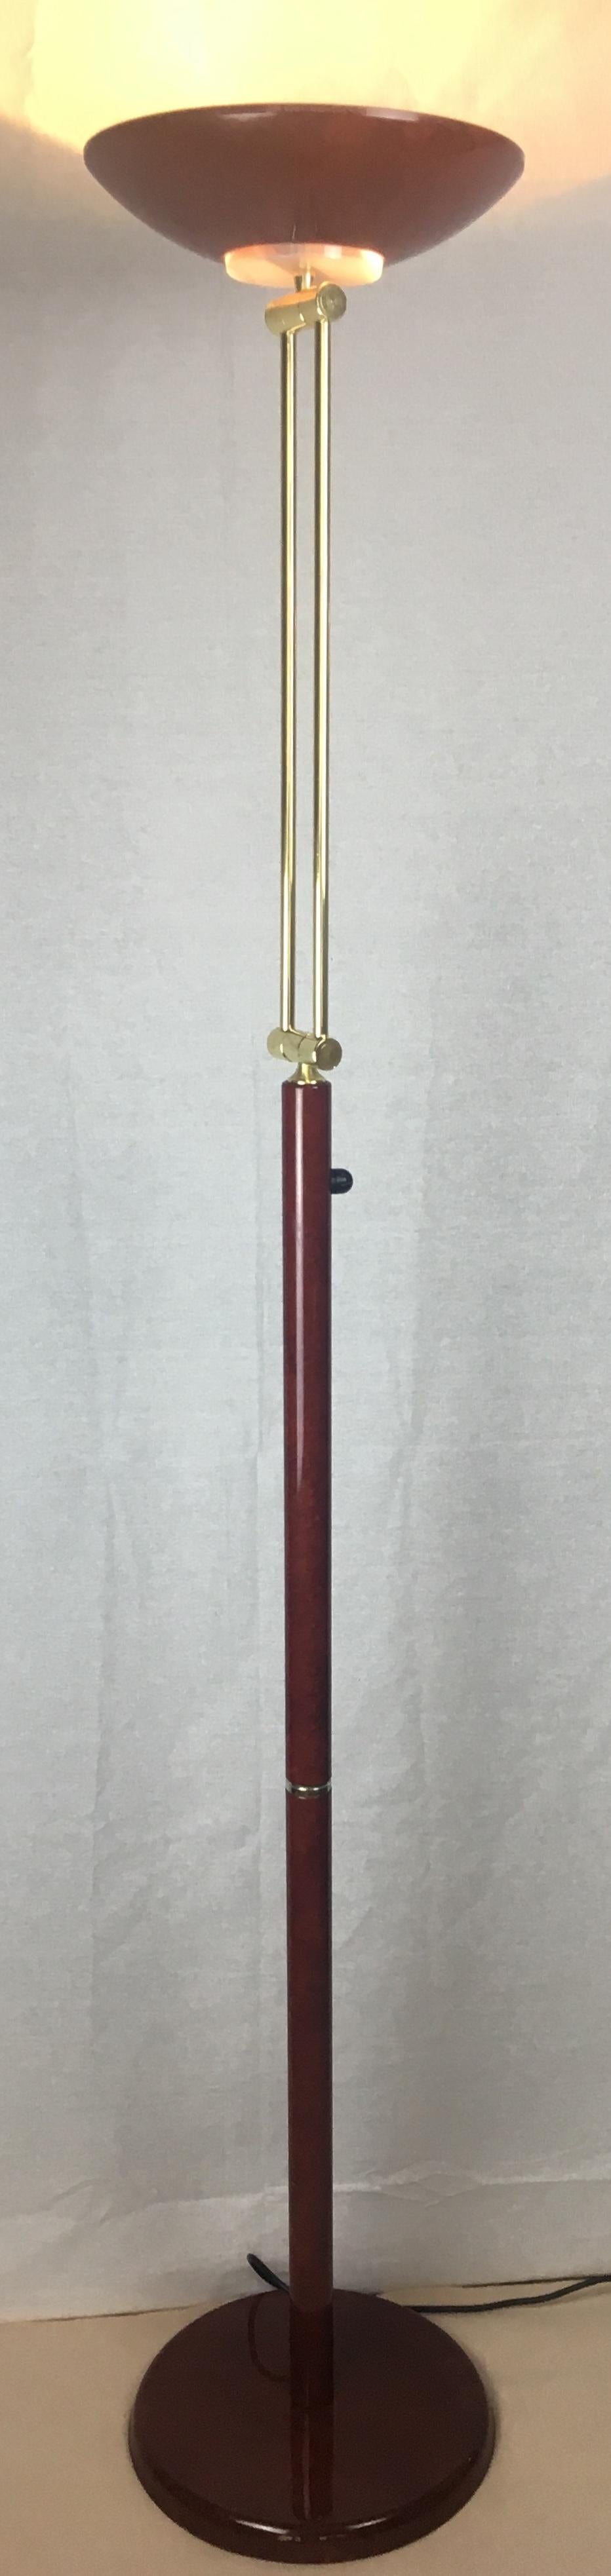 Postmodern Articulated Floor Lamp Brass and Metal In Good Condition For Sale In Miami, FL